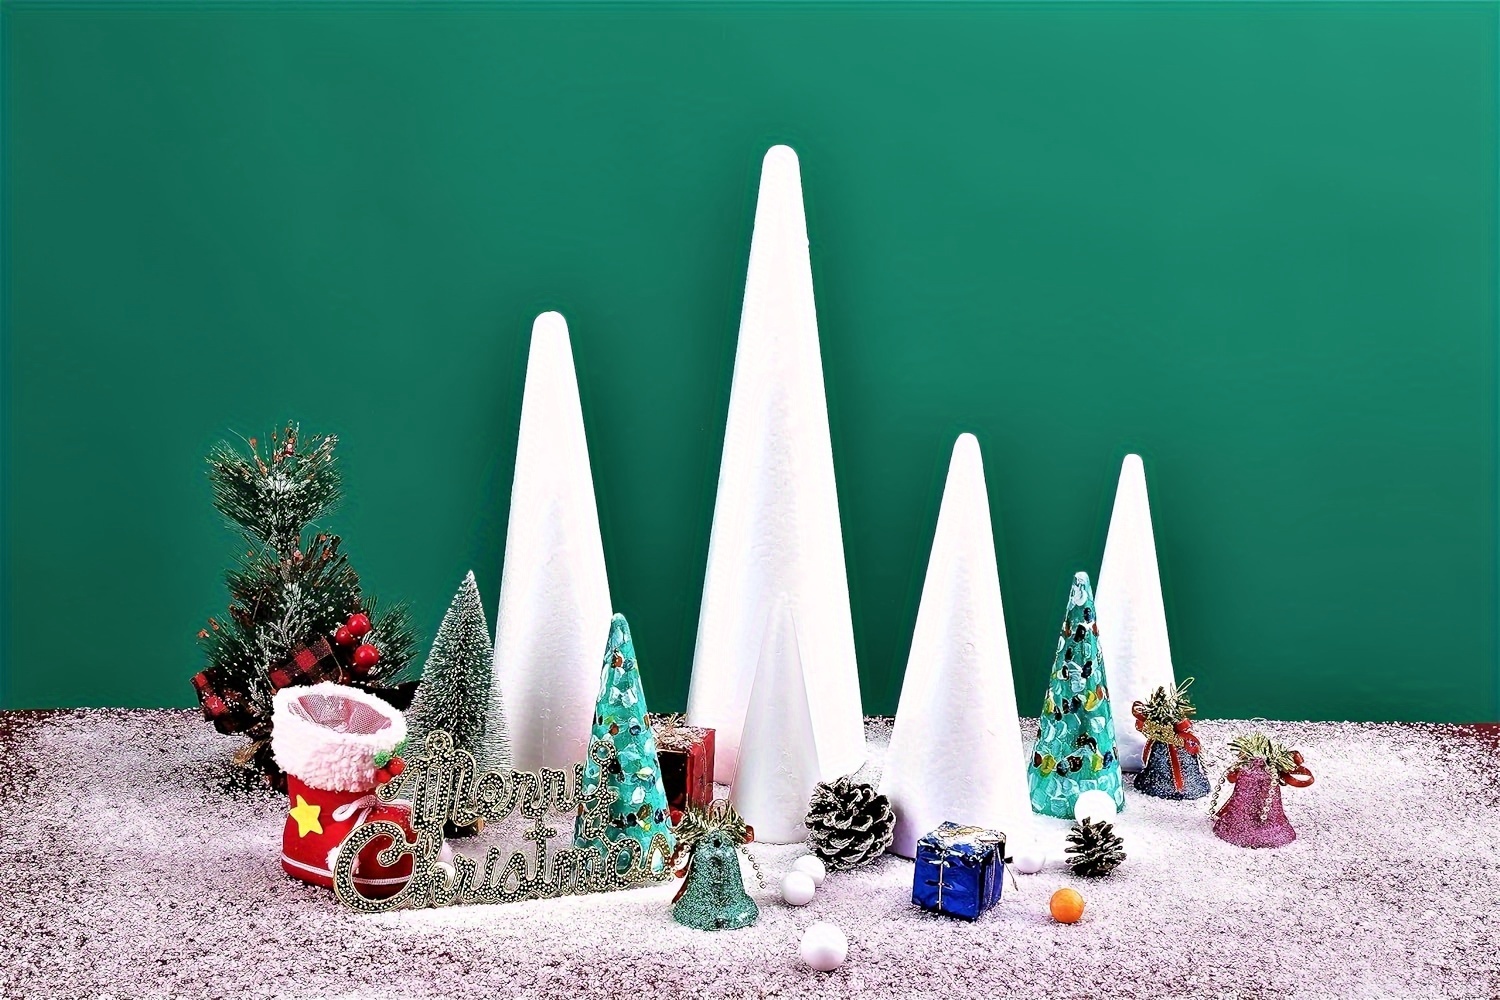 White Solid Foam Cone Suitable For School Diy Craft Projects - Temu